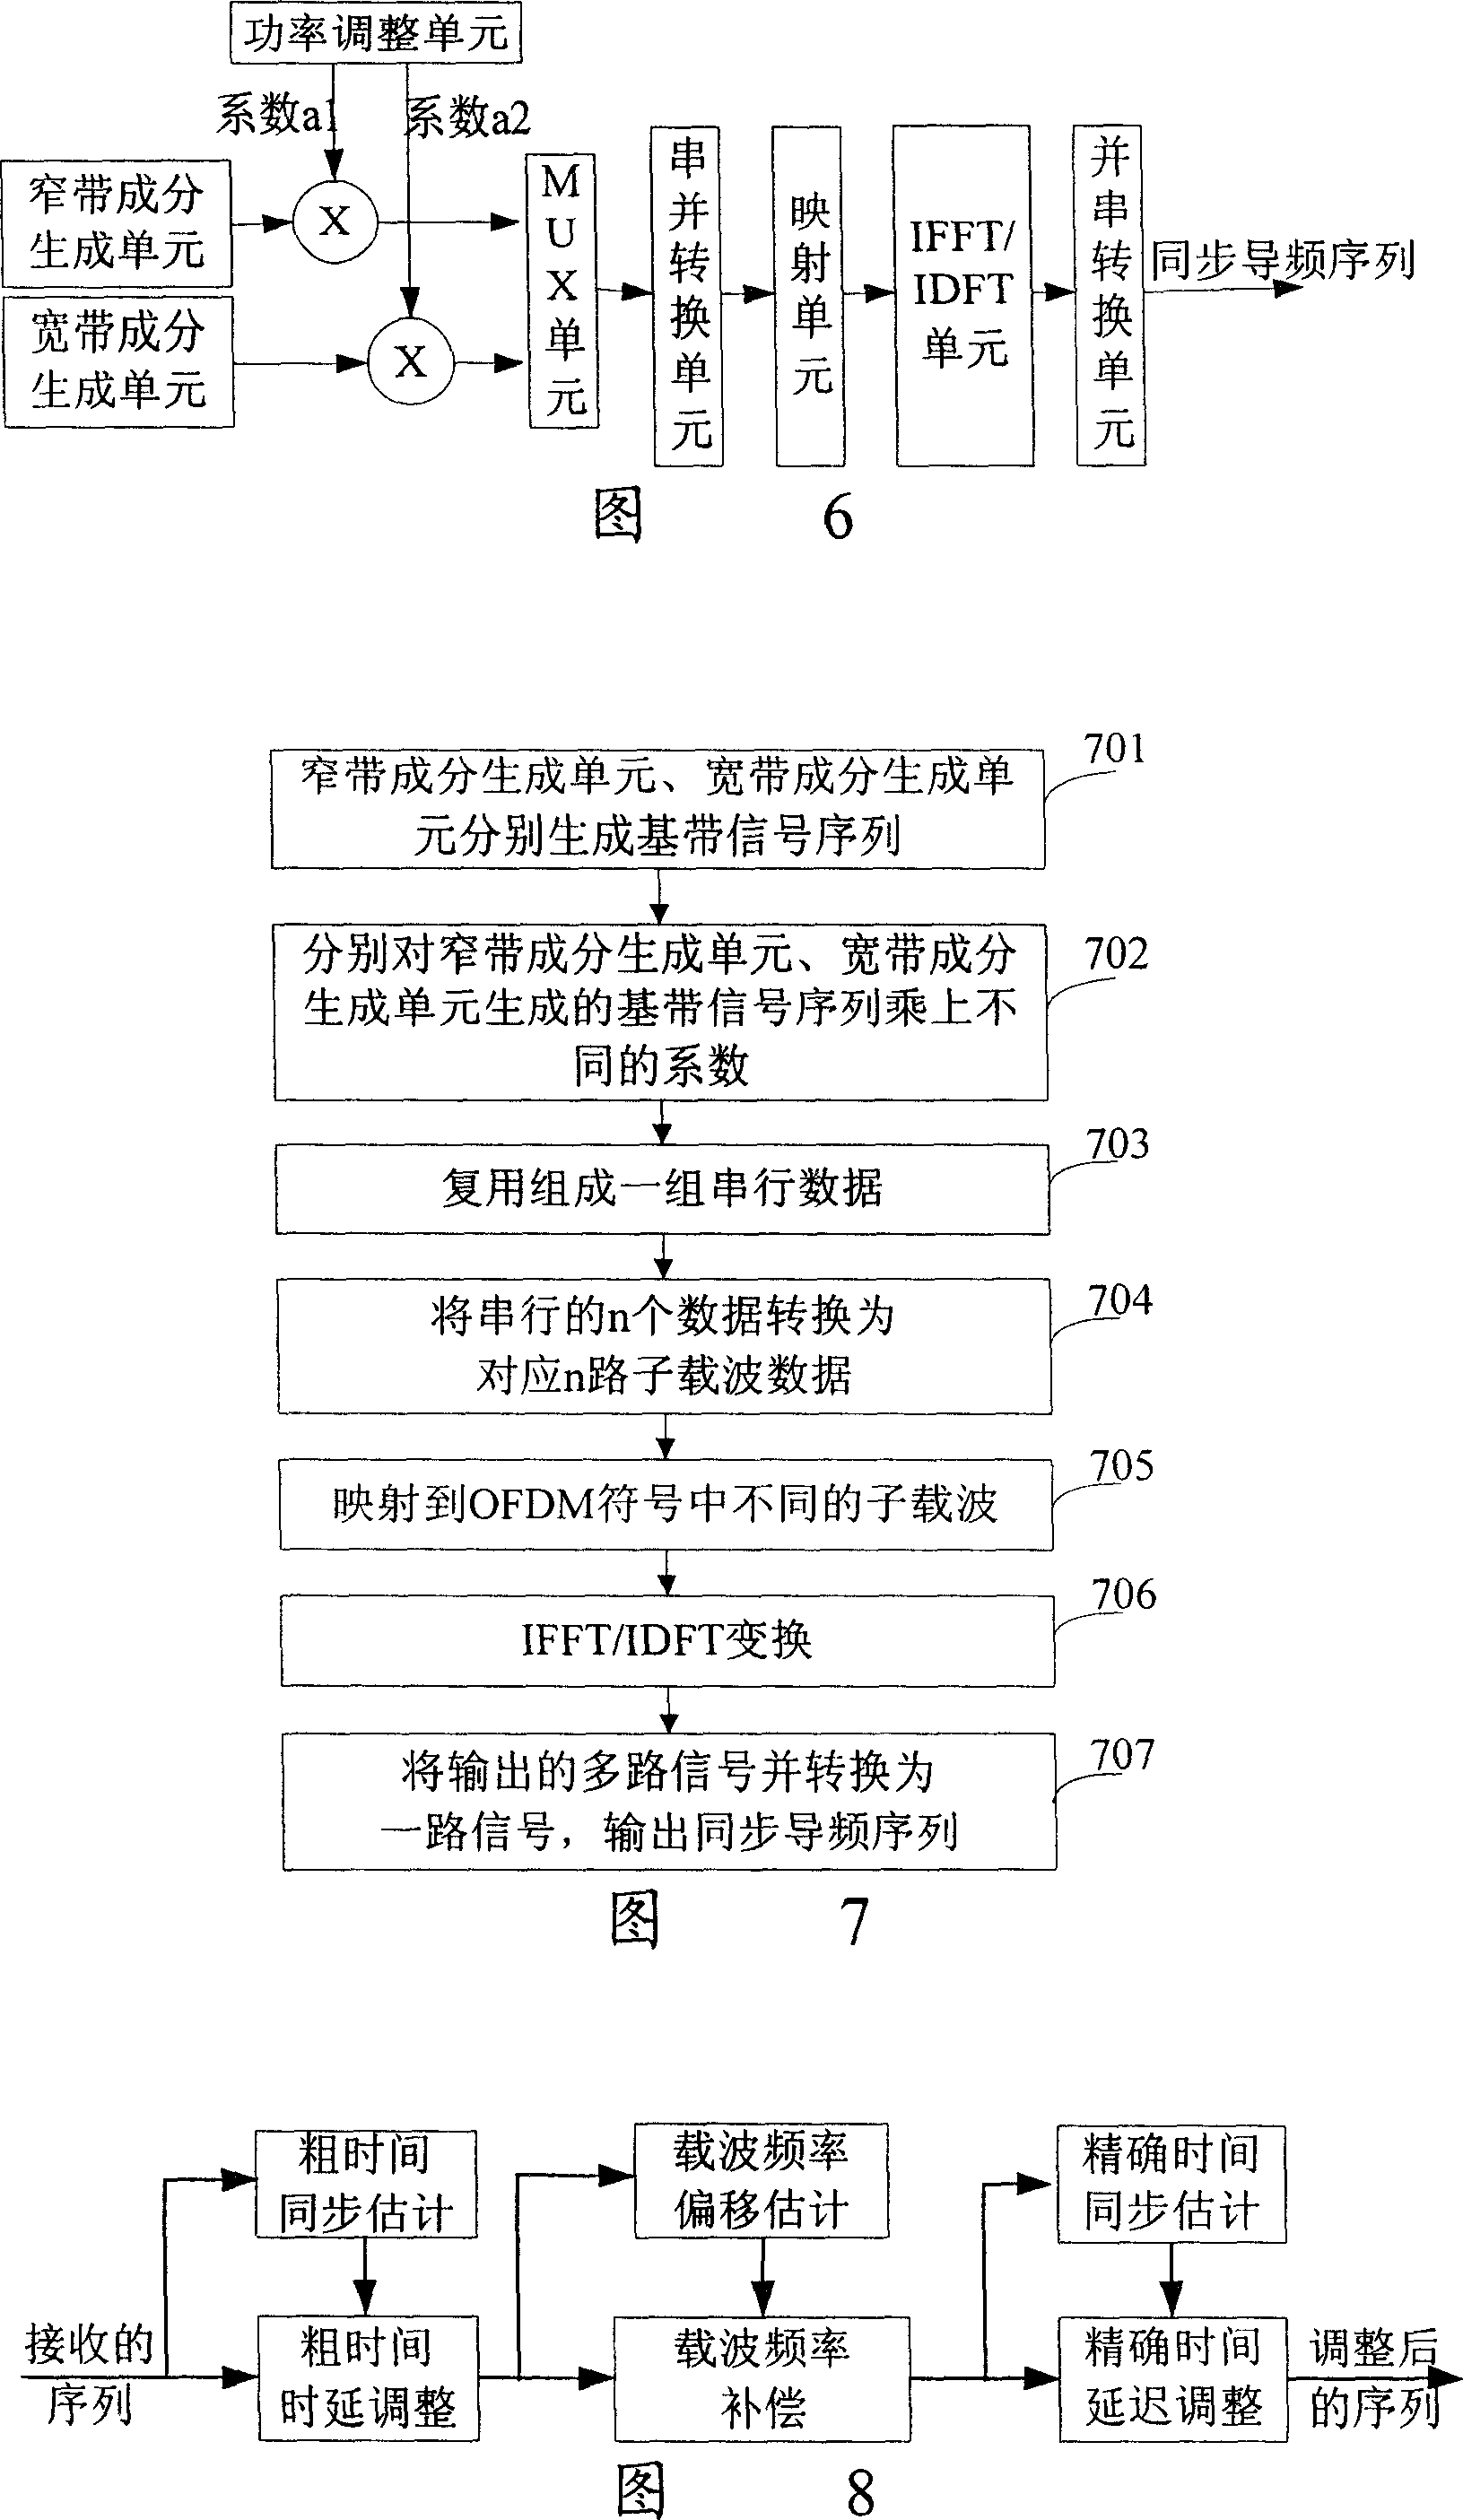 Series generating system and method, transmitting and synchronizing method and power regulating system